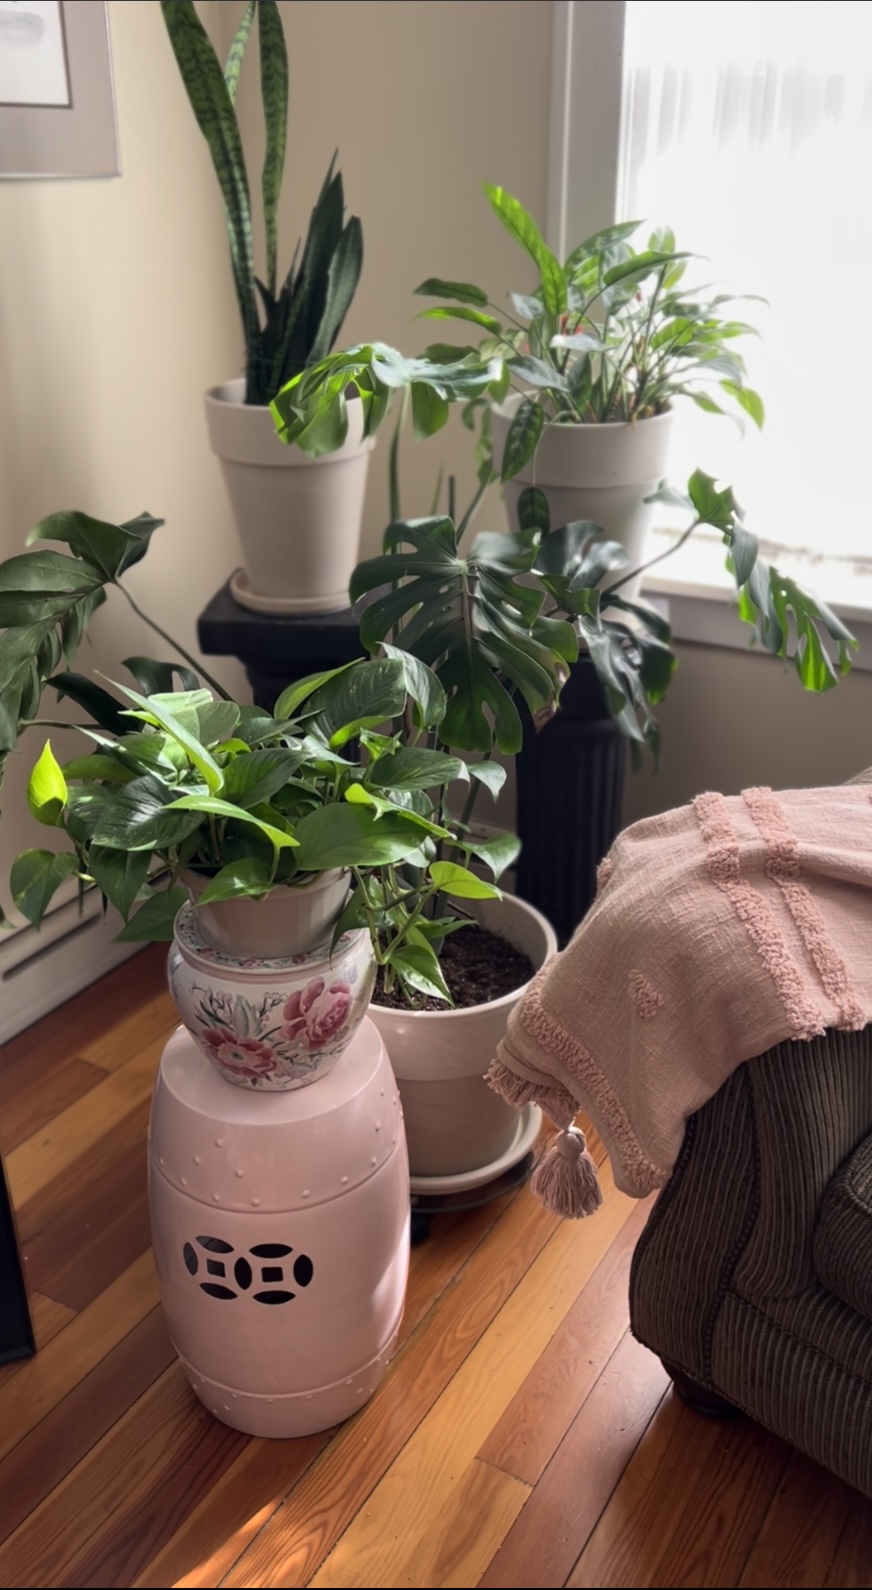 Easy plants to grow - Monstera, Snake Plant, Philo, and Chinese Evergreen